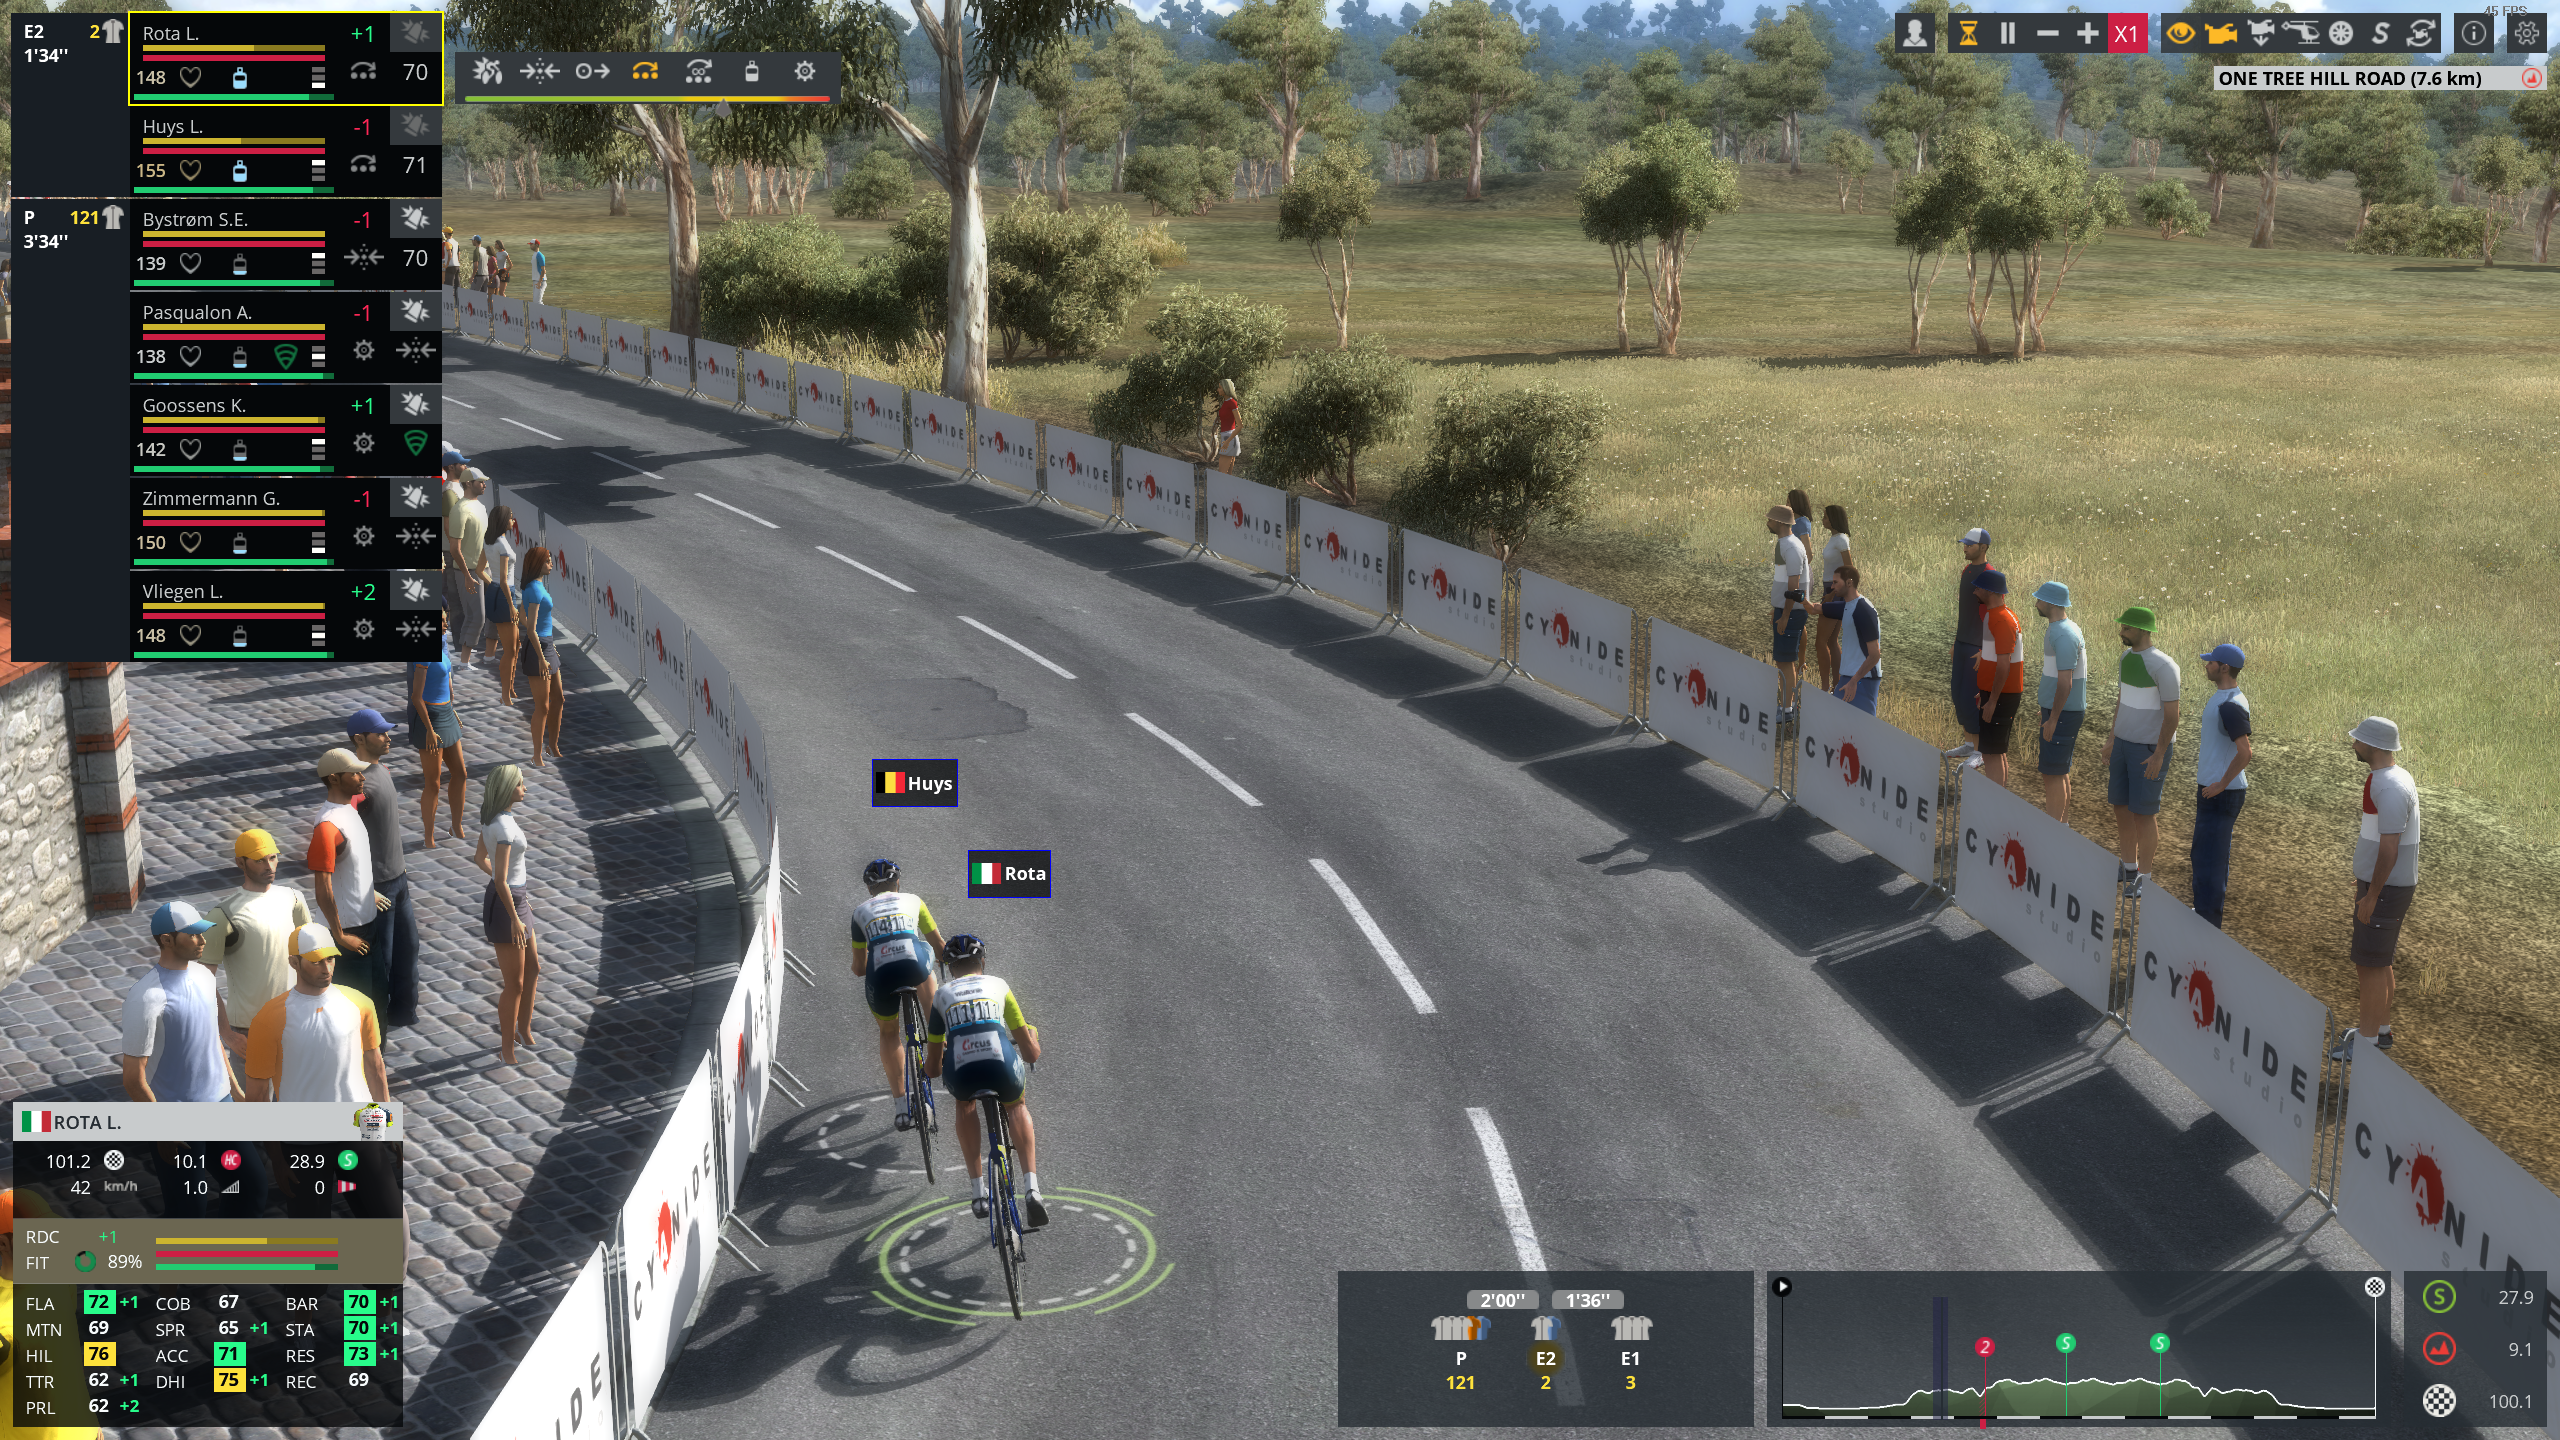 Pro Cycling Manager 2022: All you need to know about the new game